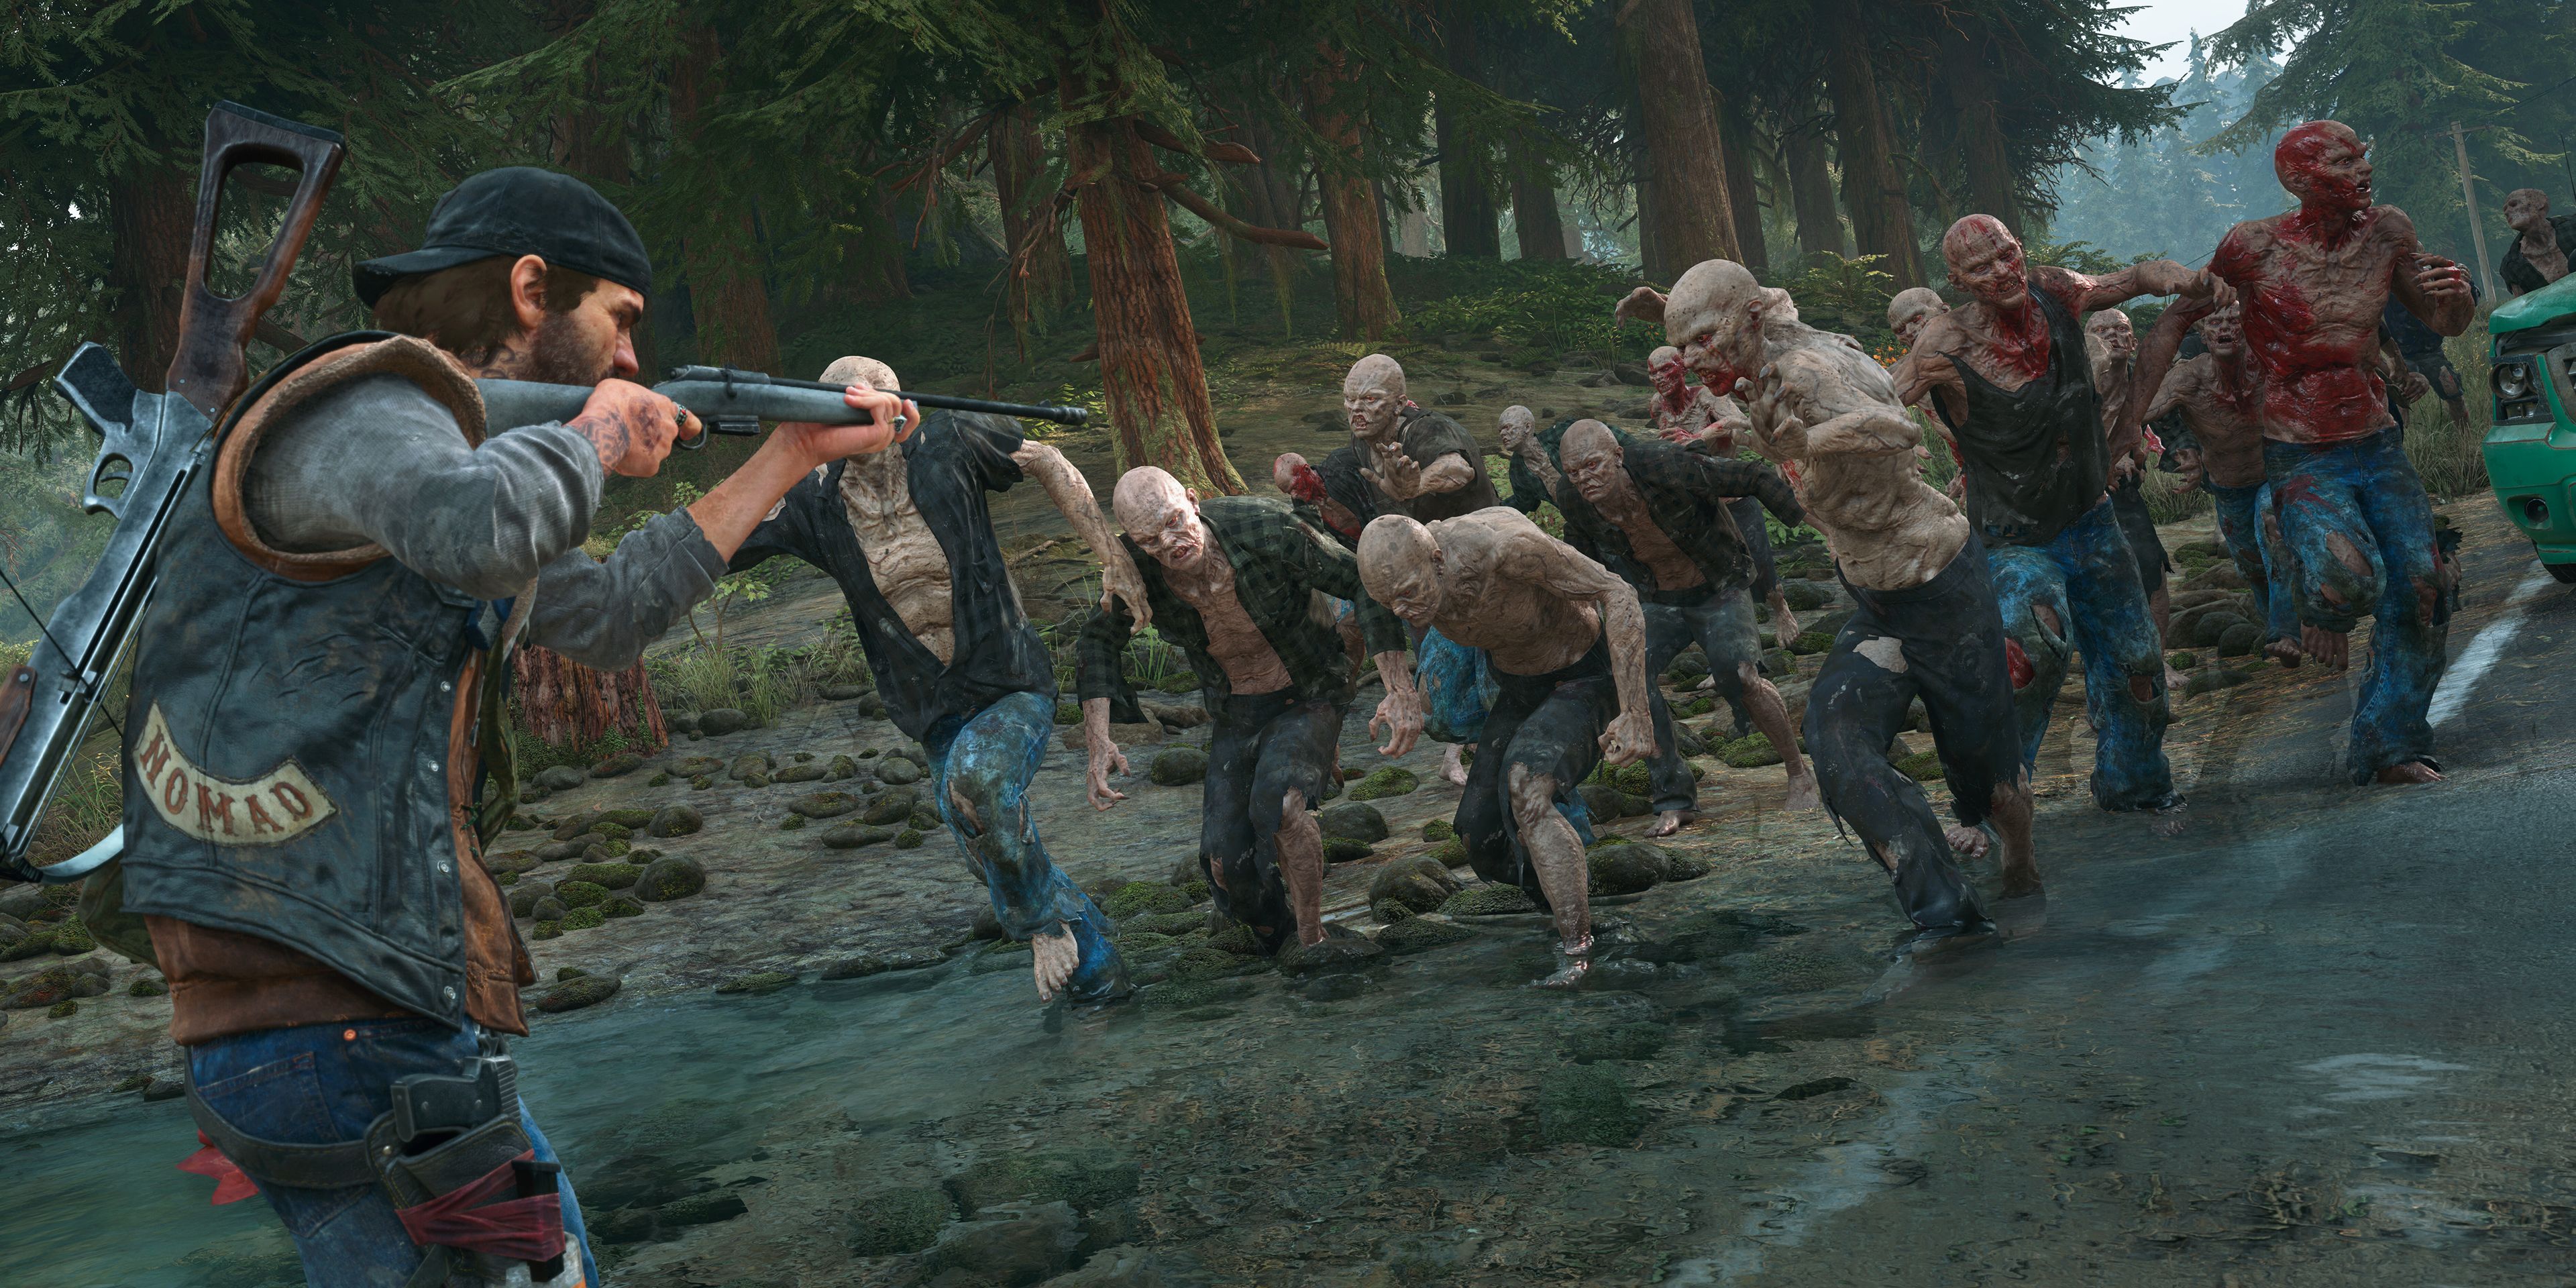 A photo of Deacon pointing a shotgun at a Horde in Days Gone.